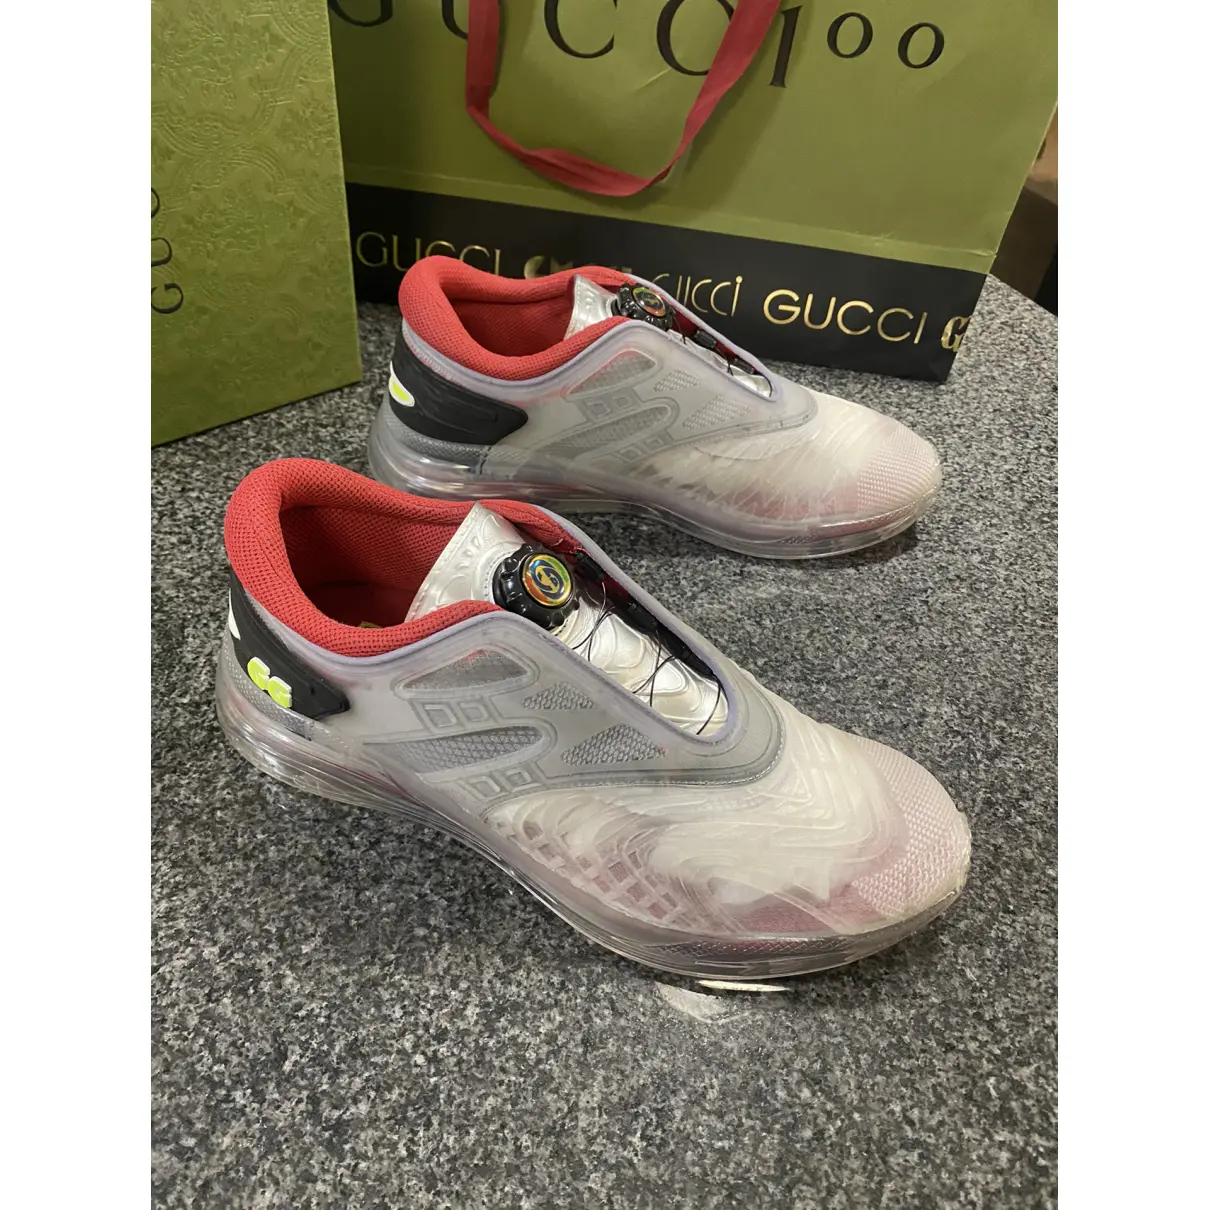 Buy Gucci Ultrapace R low trainers online